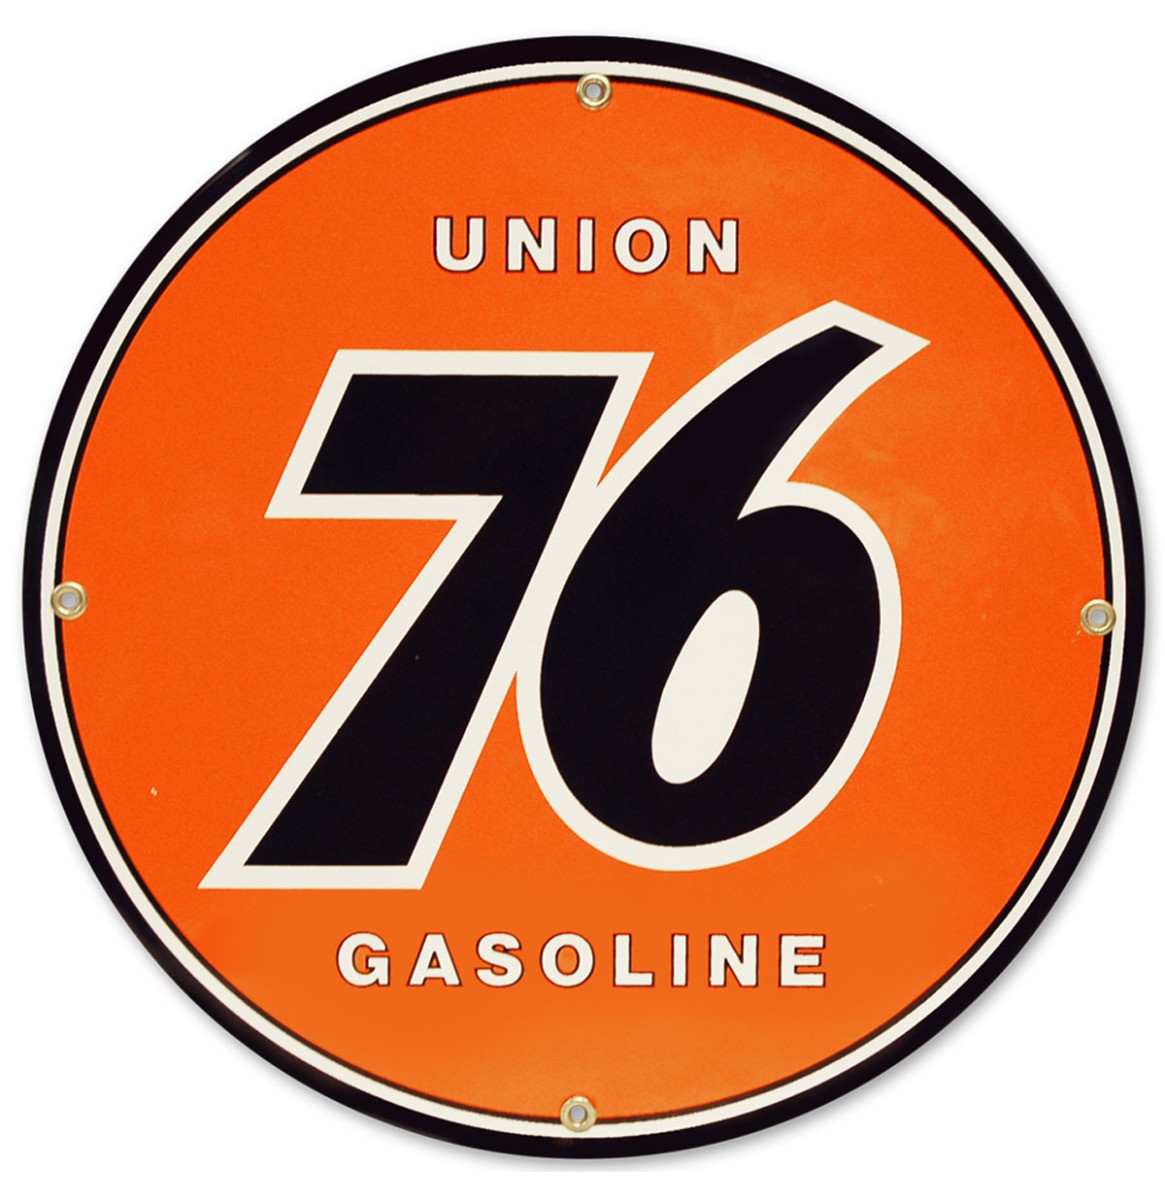 Union 76 Rond Emaille Bord 30 cm